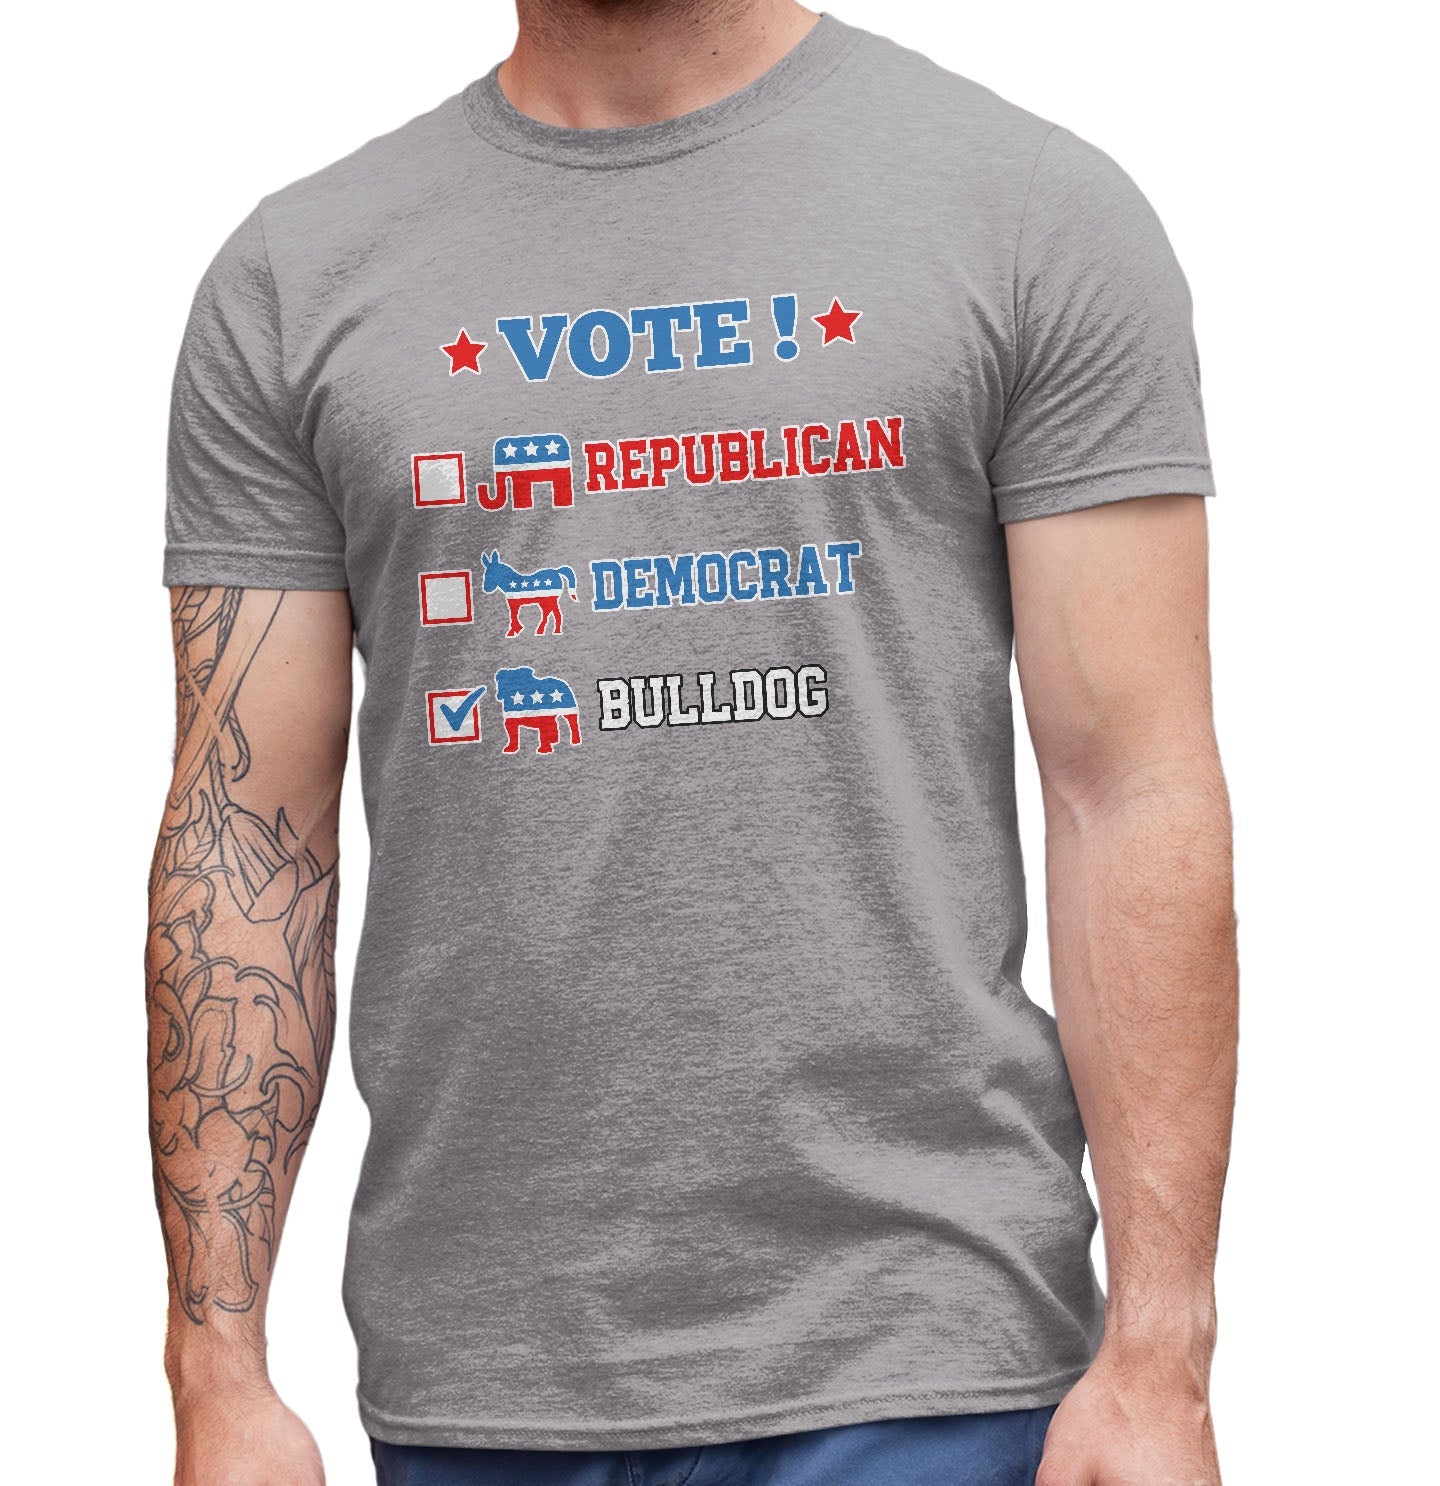 Vote for the Bulldog - Adult Unisex T-Shirt